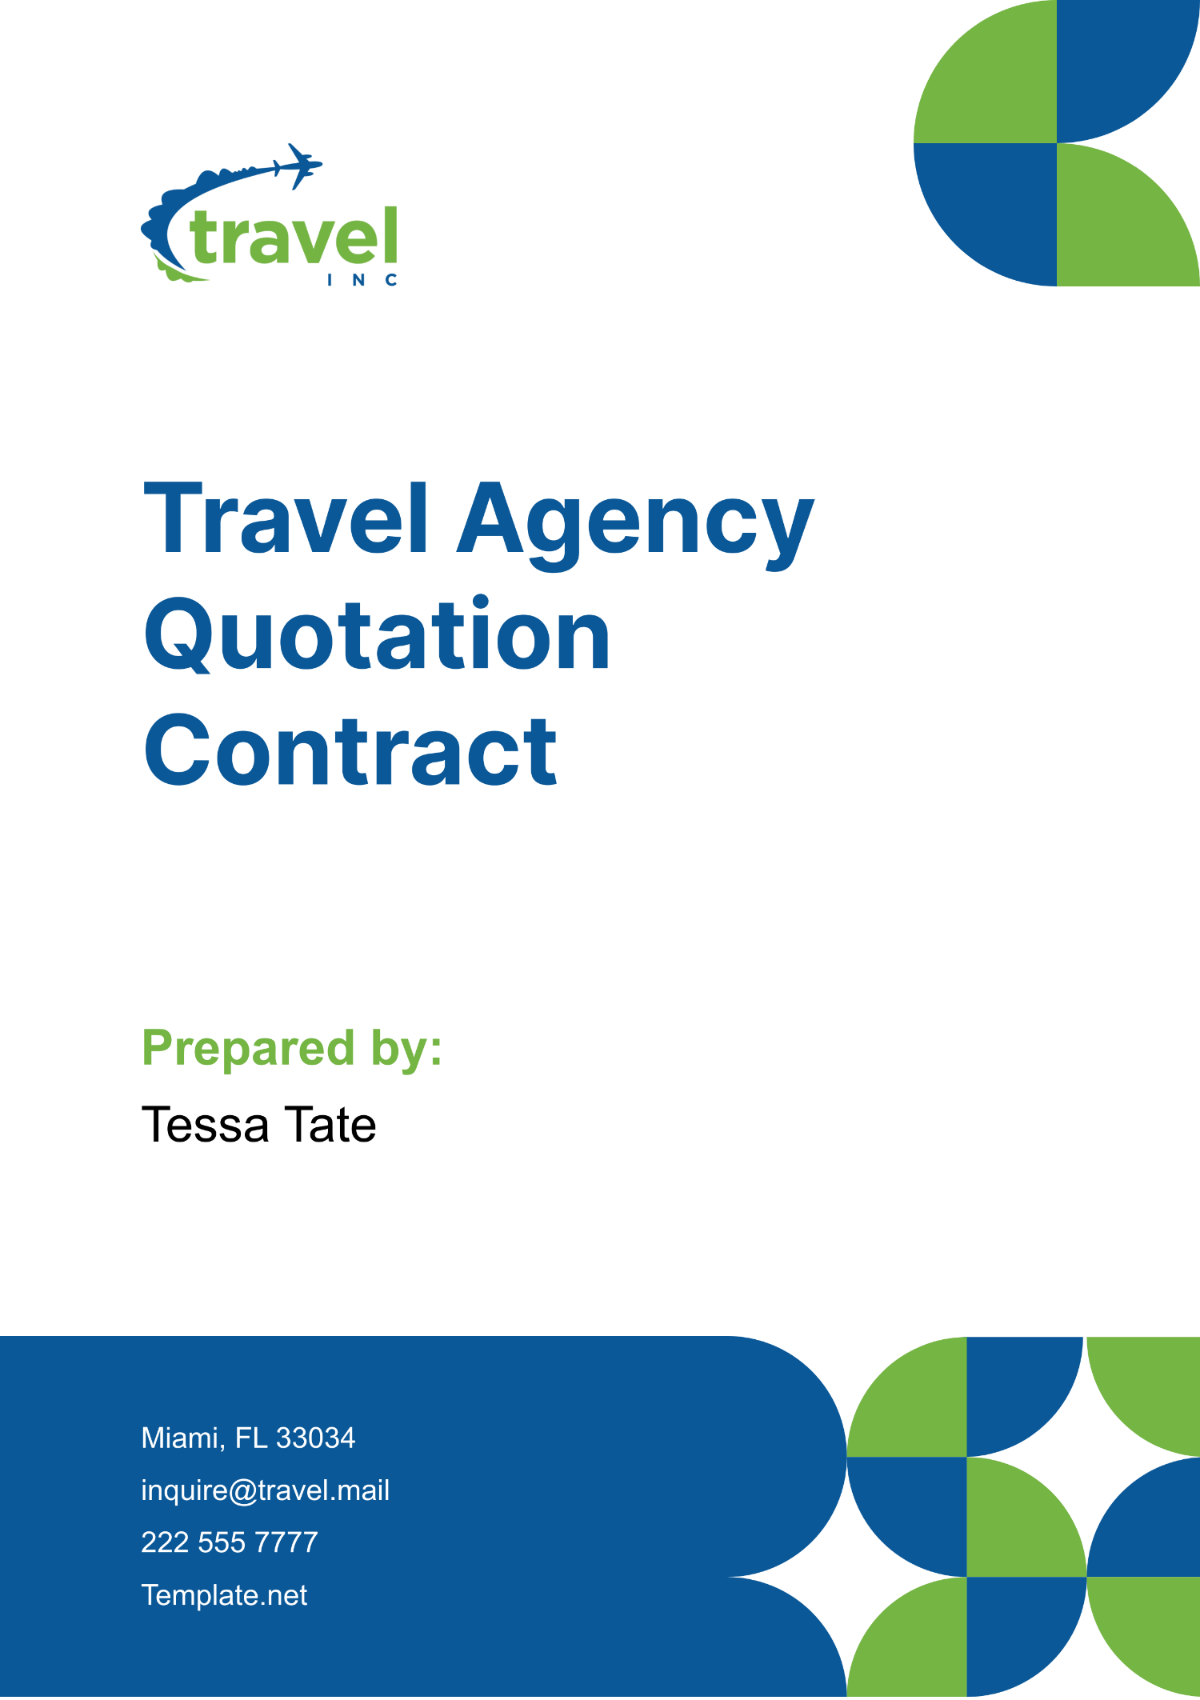 Free Travel Agency Quotation Contract Template